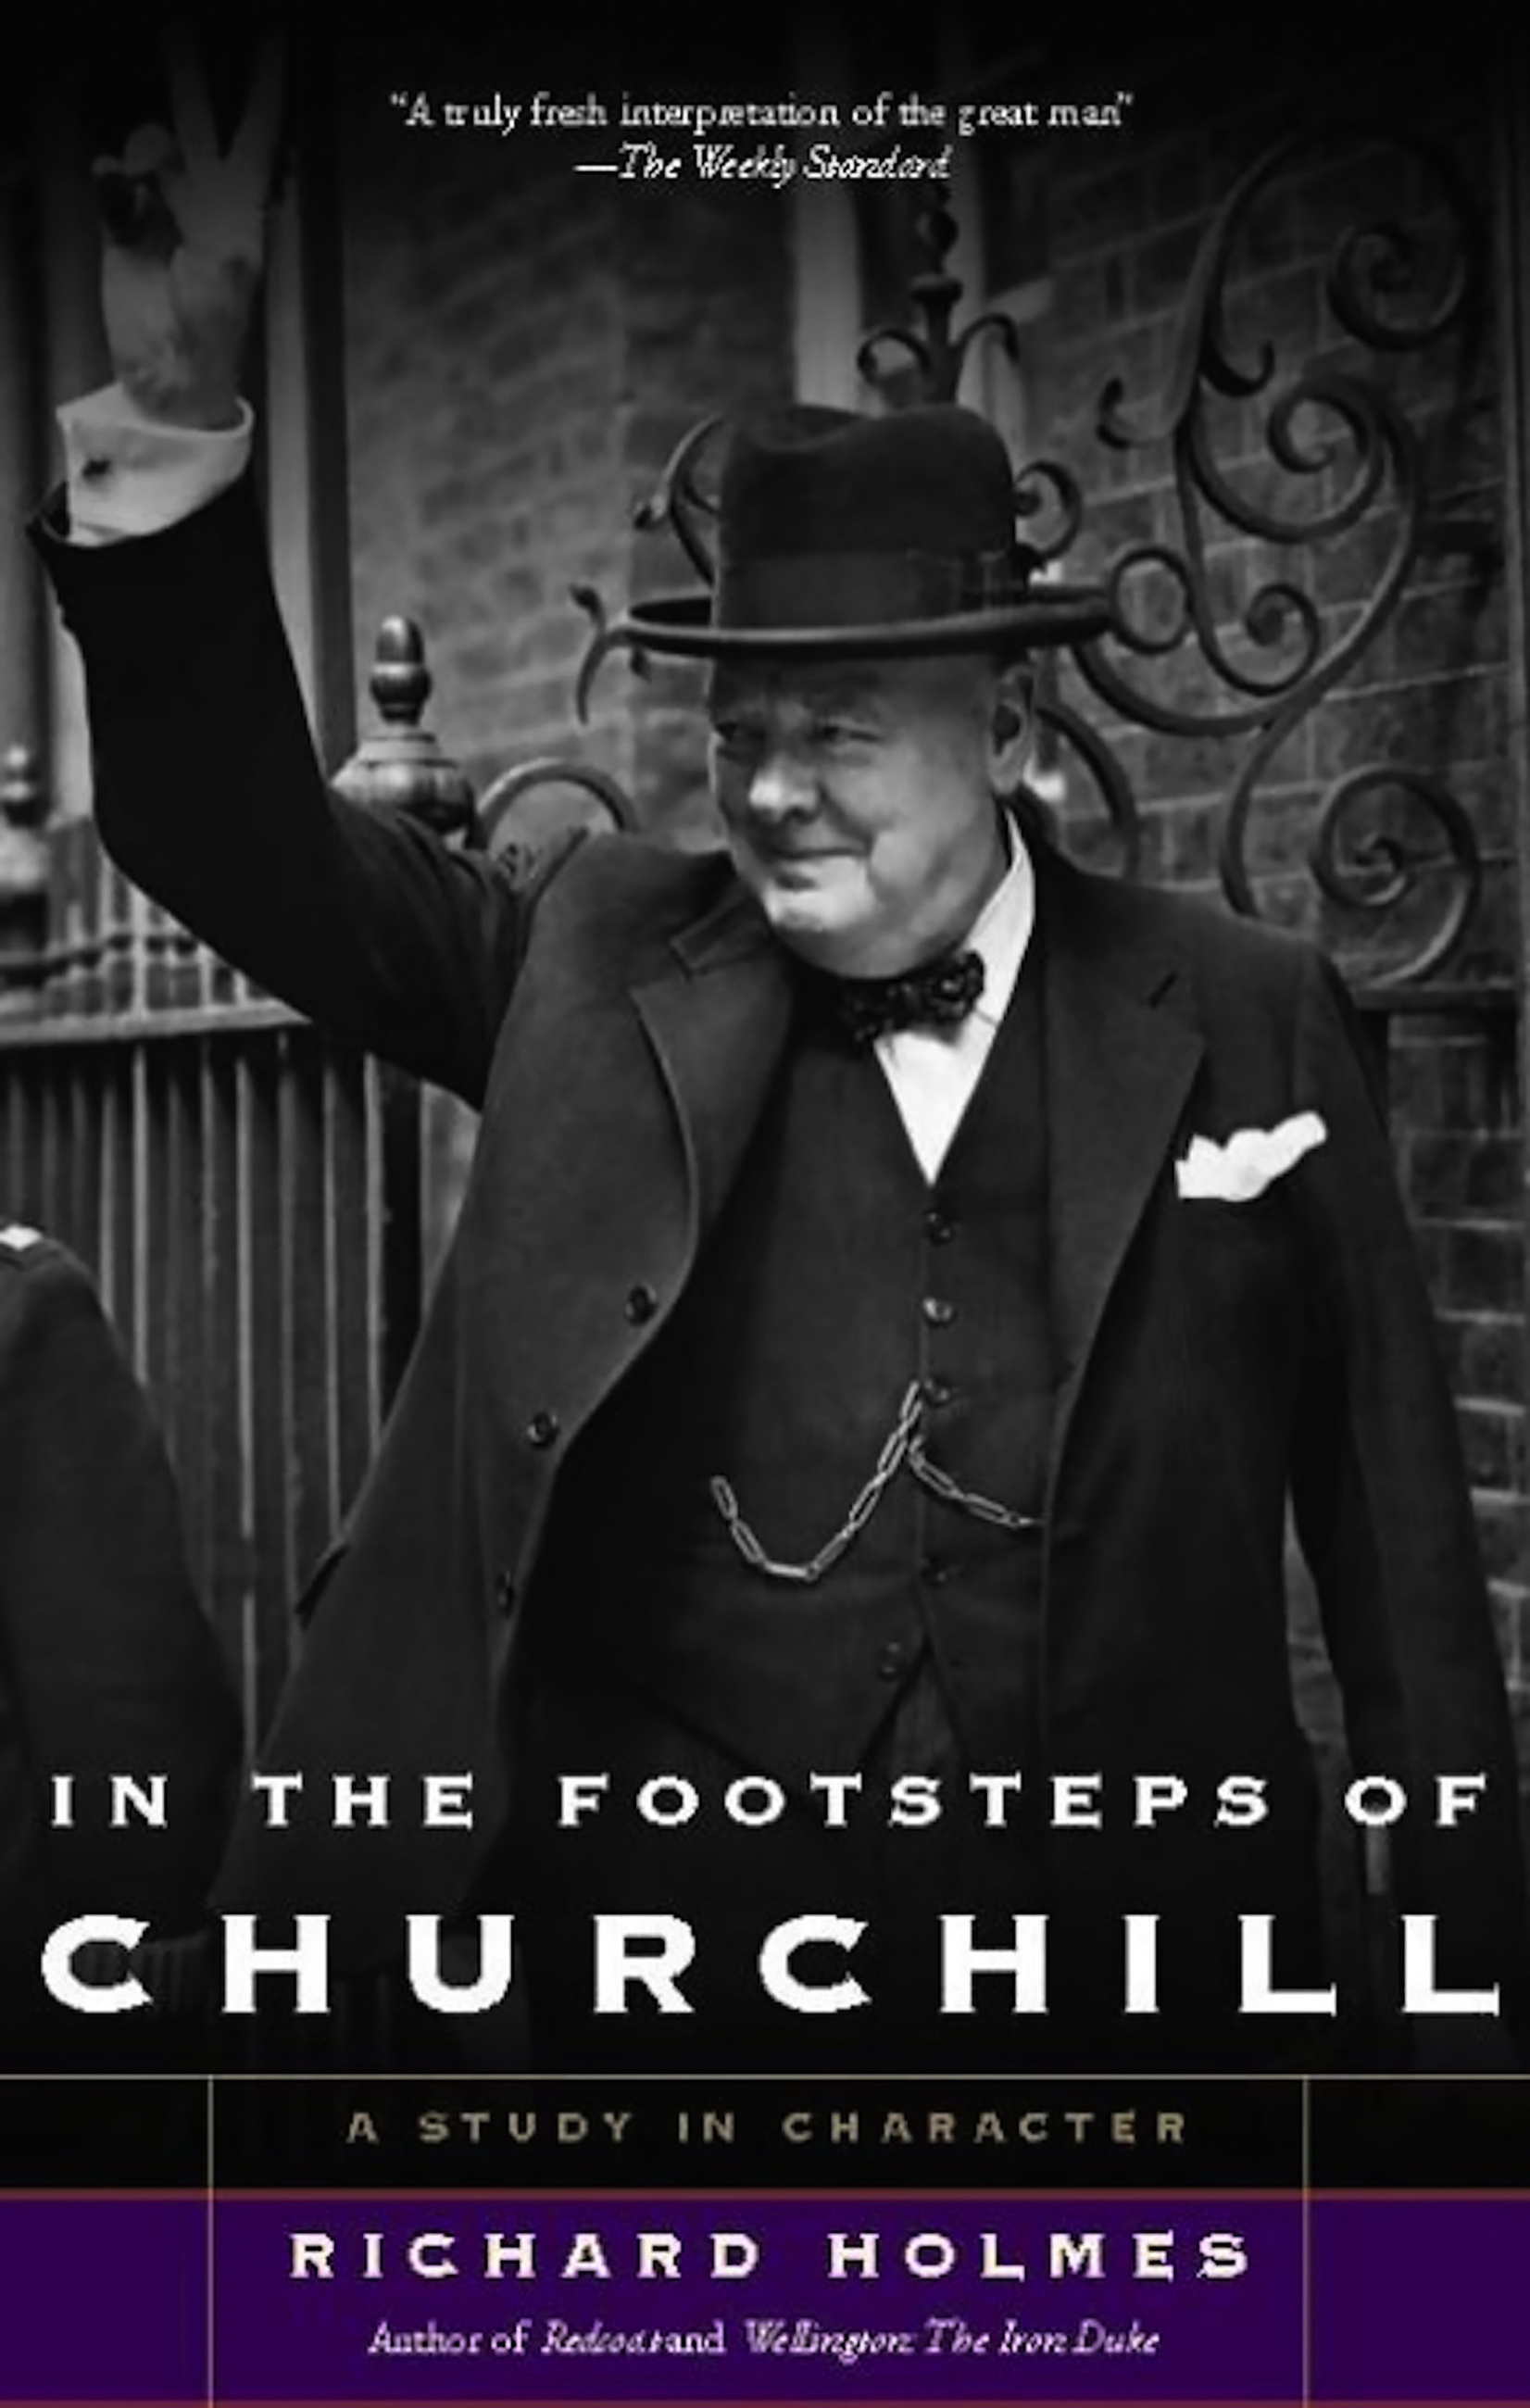 In The Footsteps of Churchill by Richard Holmes Hachette Book Group pic picture